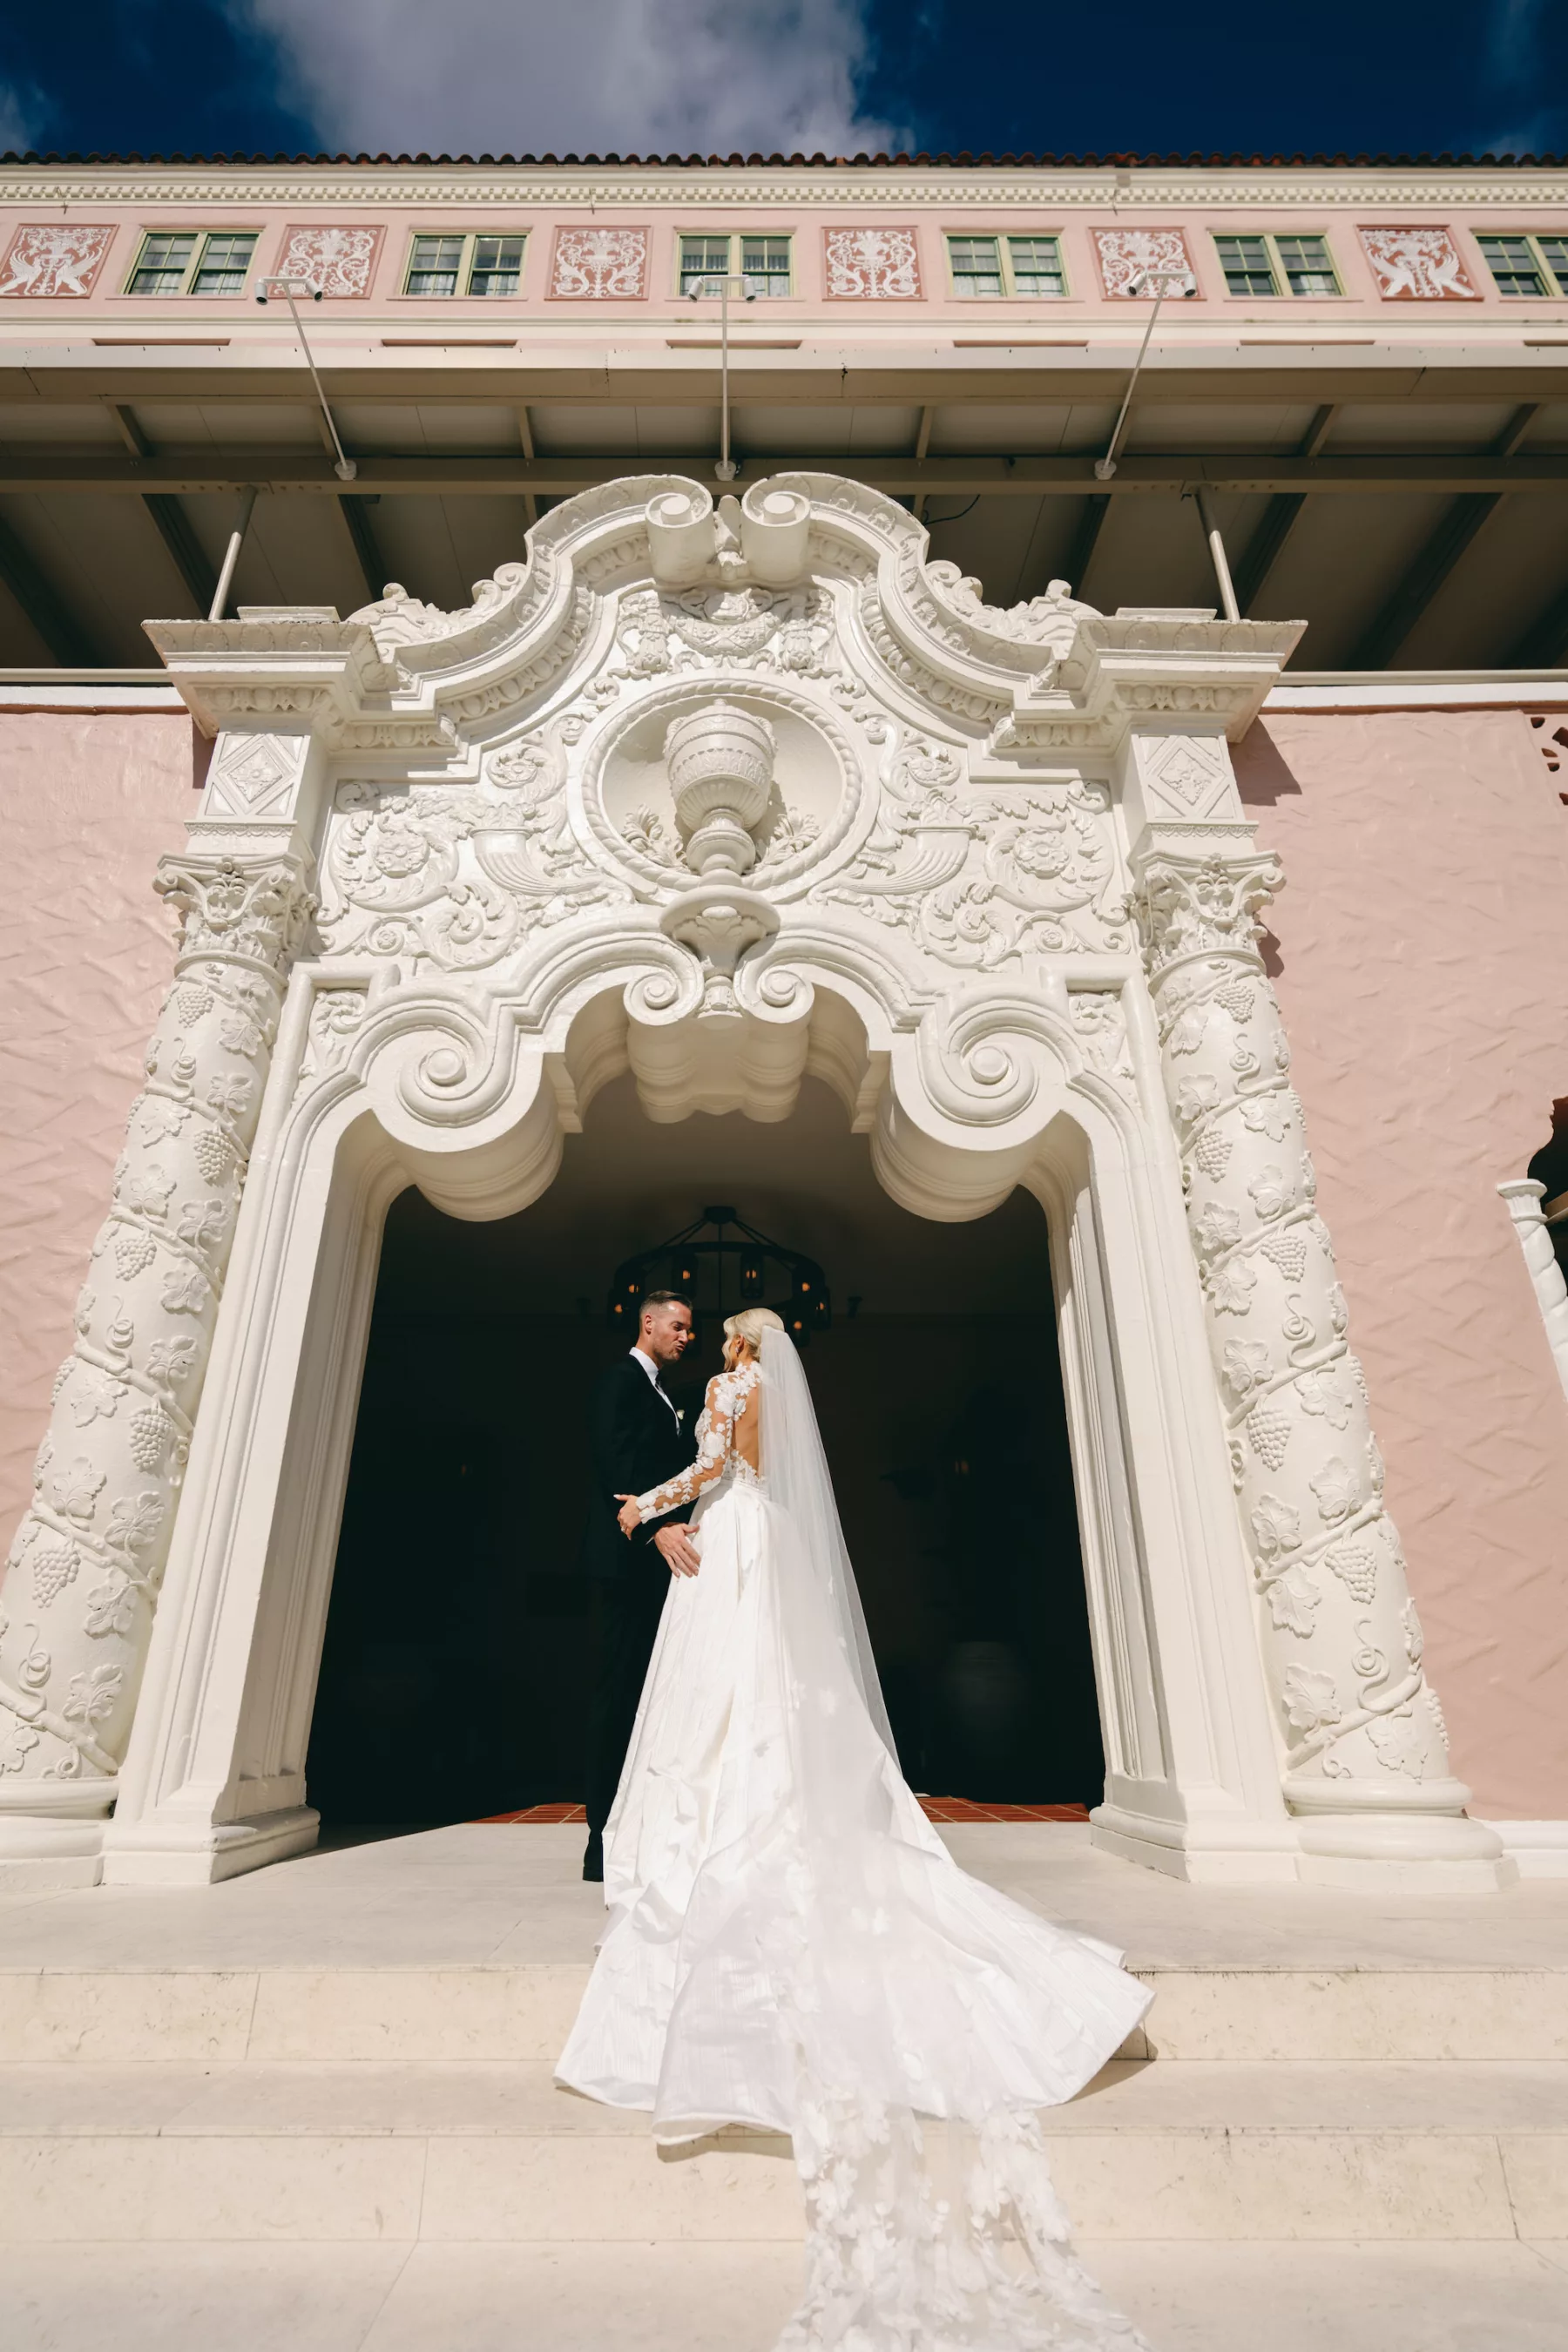 Bride and Groom First Look Wedding Portrait | St Pete Historic Hotel Venue The Vinoy